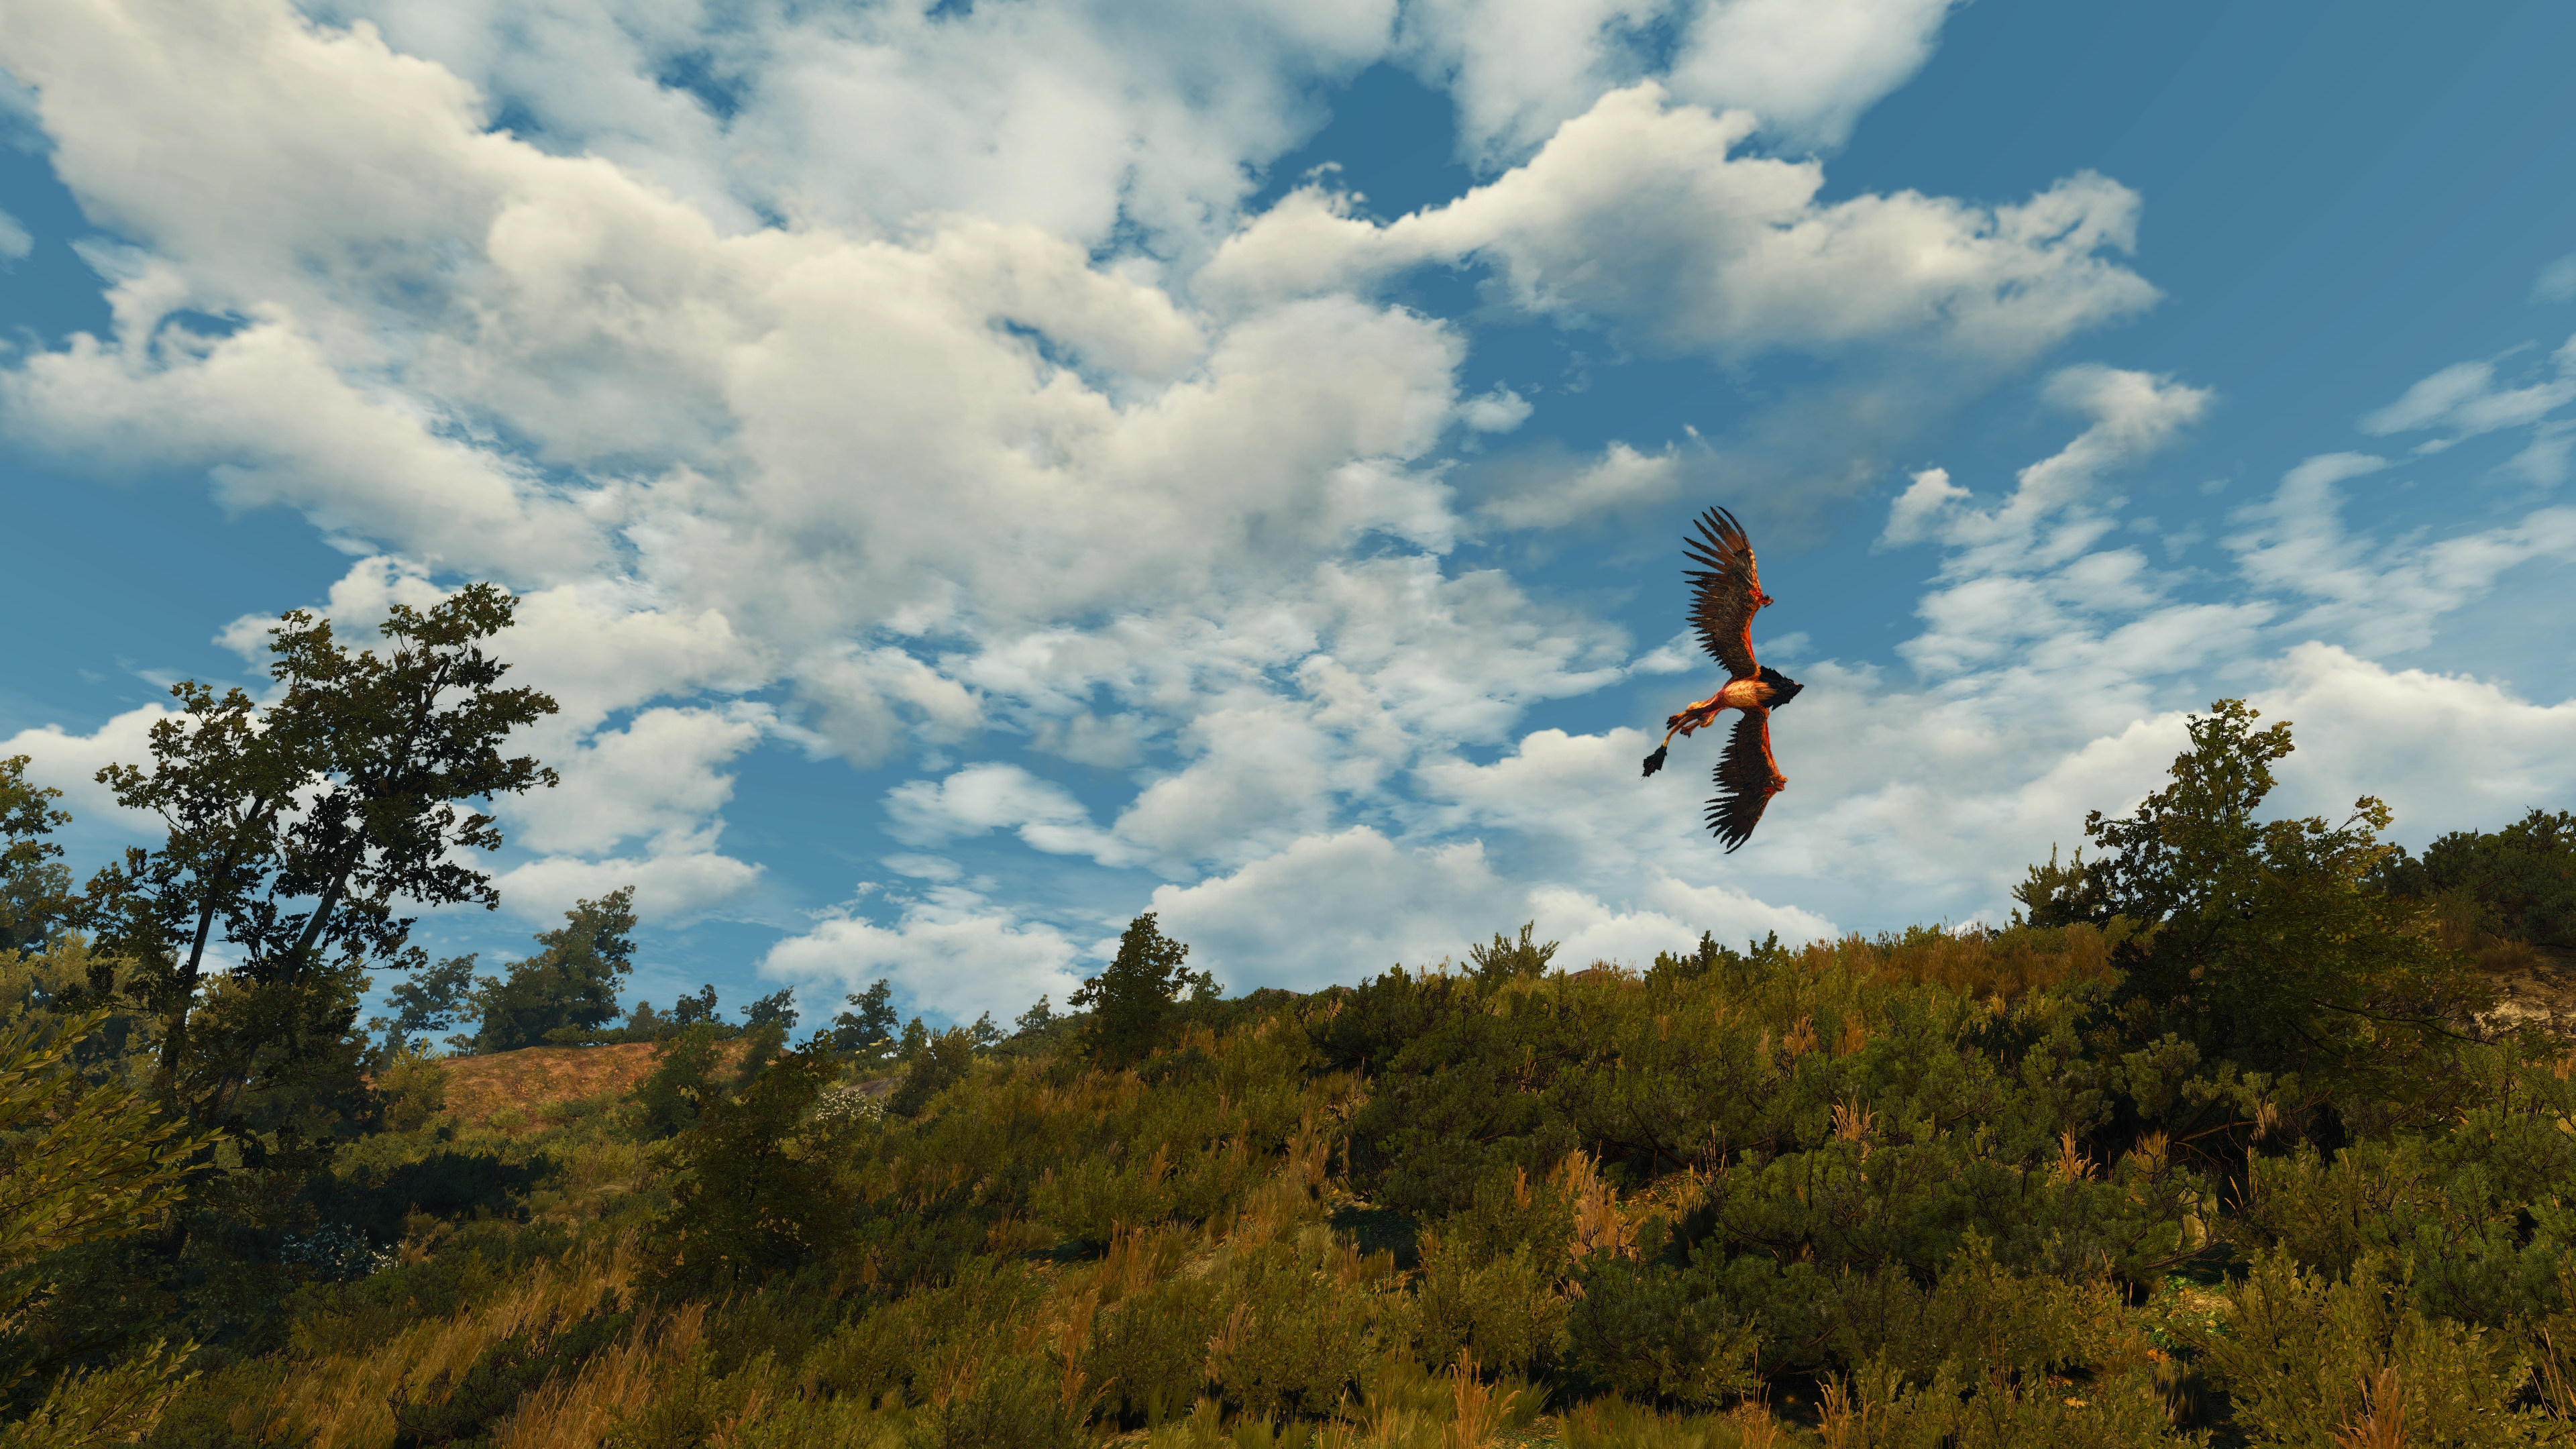 General 3840x2160 The Witcher 3: Wild Hunt screen shot PC gaming The Witcher 3: Wild Hunt - Blood and Wine griffon video game art video games clouds sky trees flying creature skyscape CGI